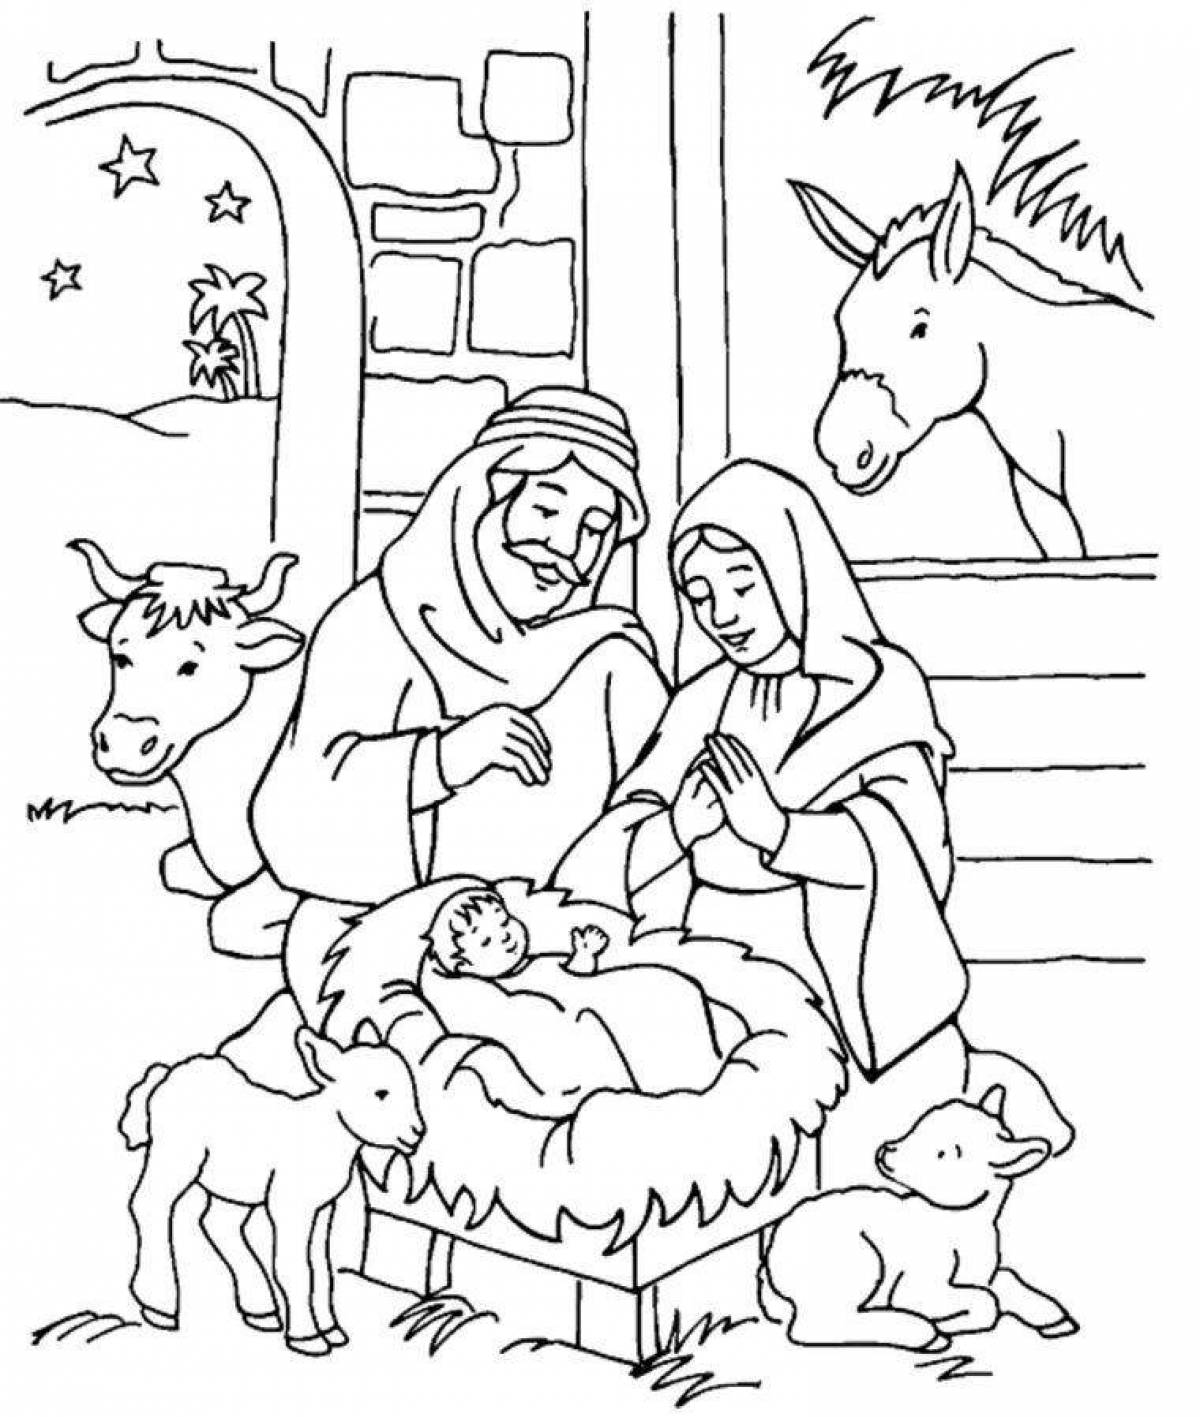 Coloring page charm of joseph and mary